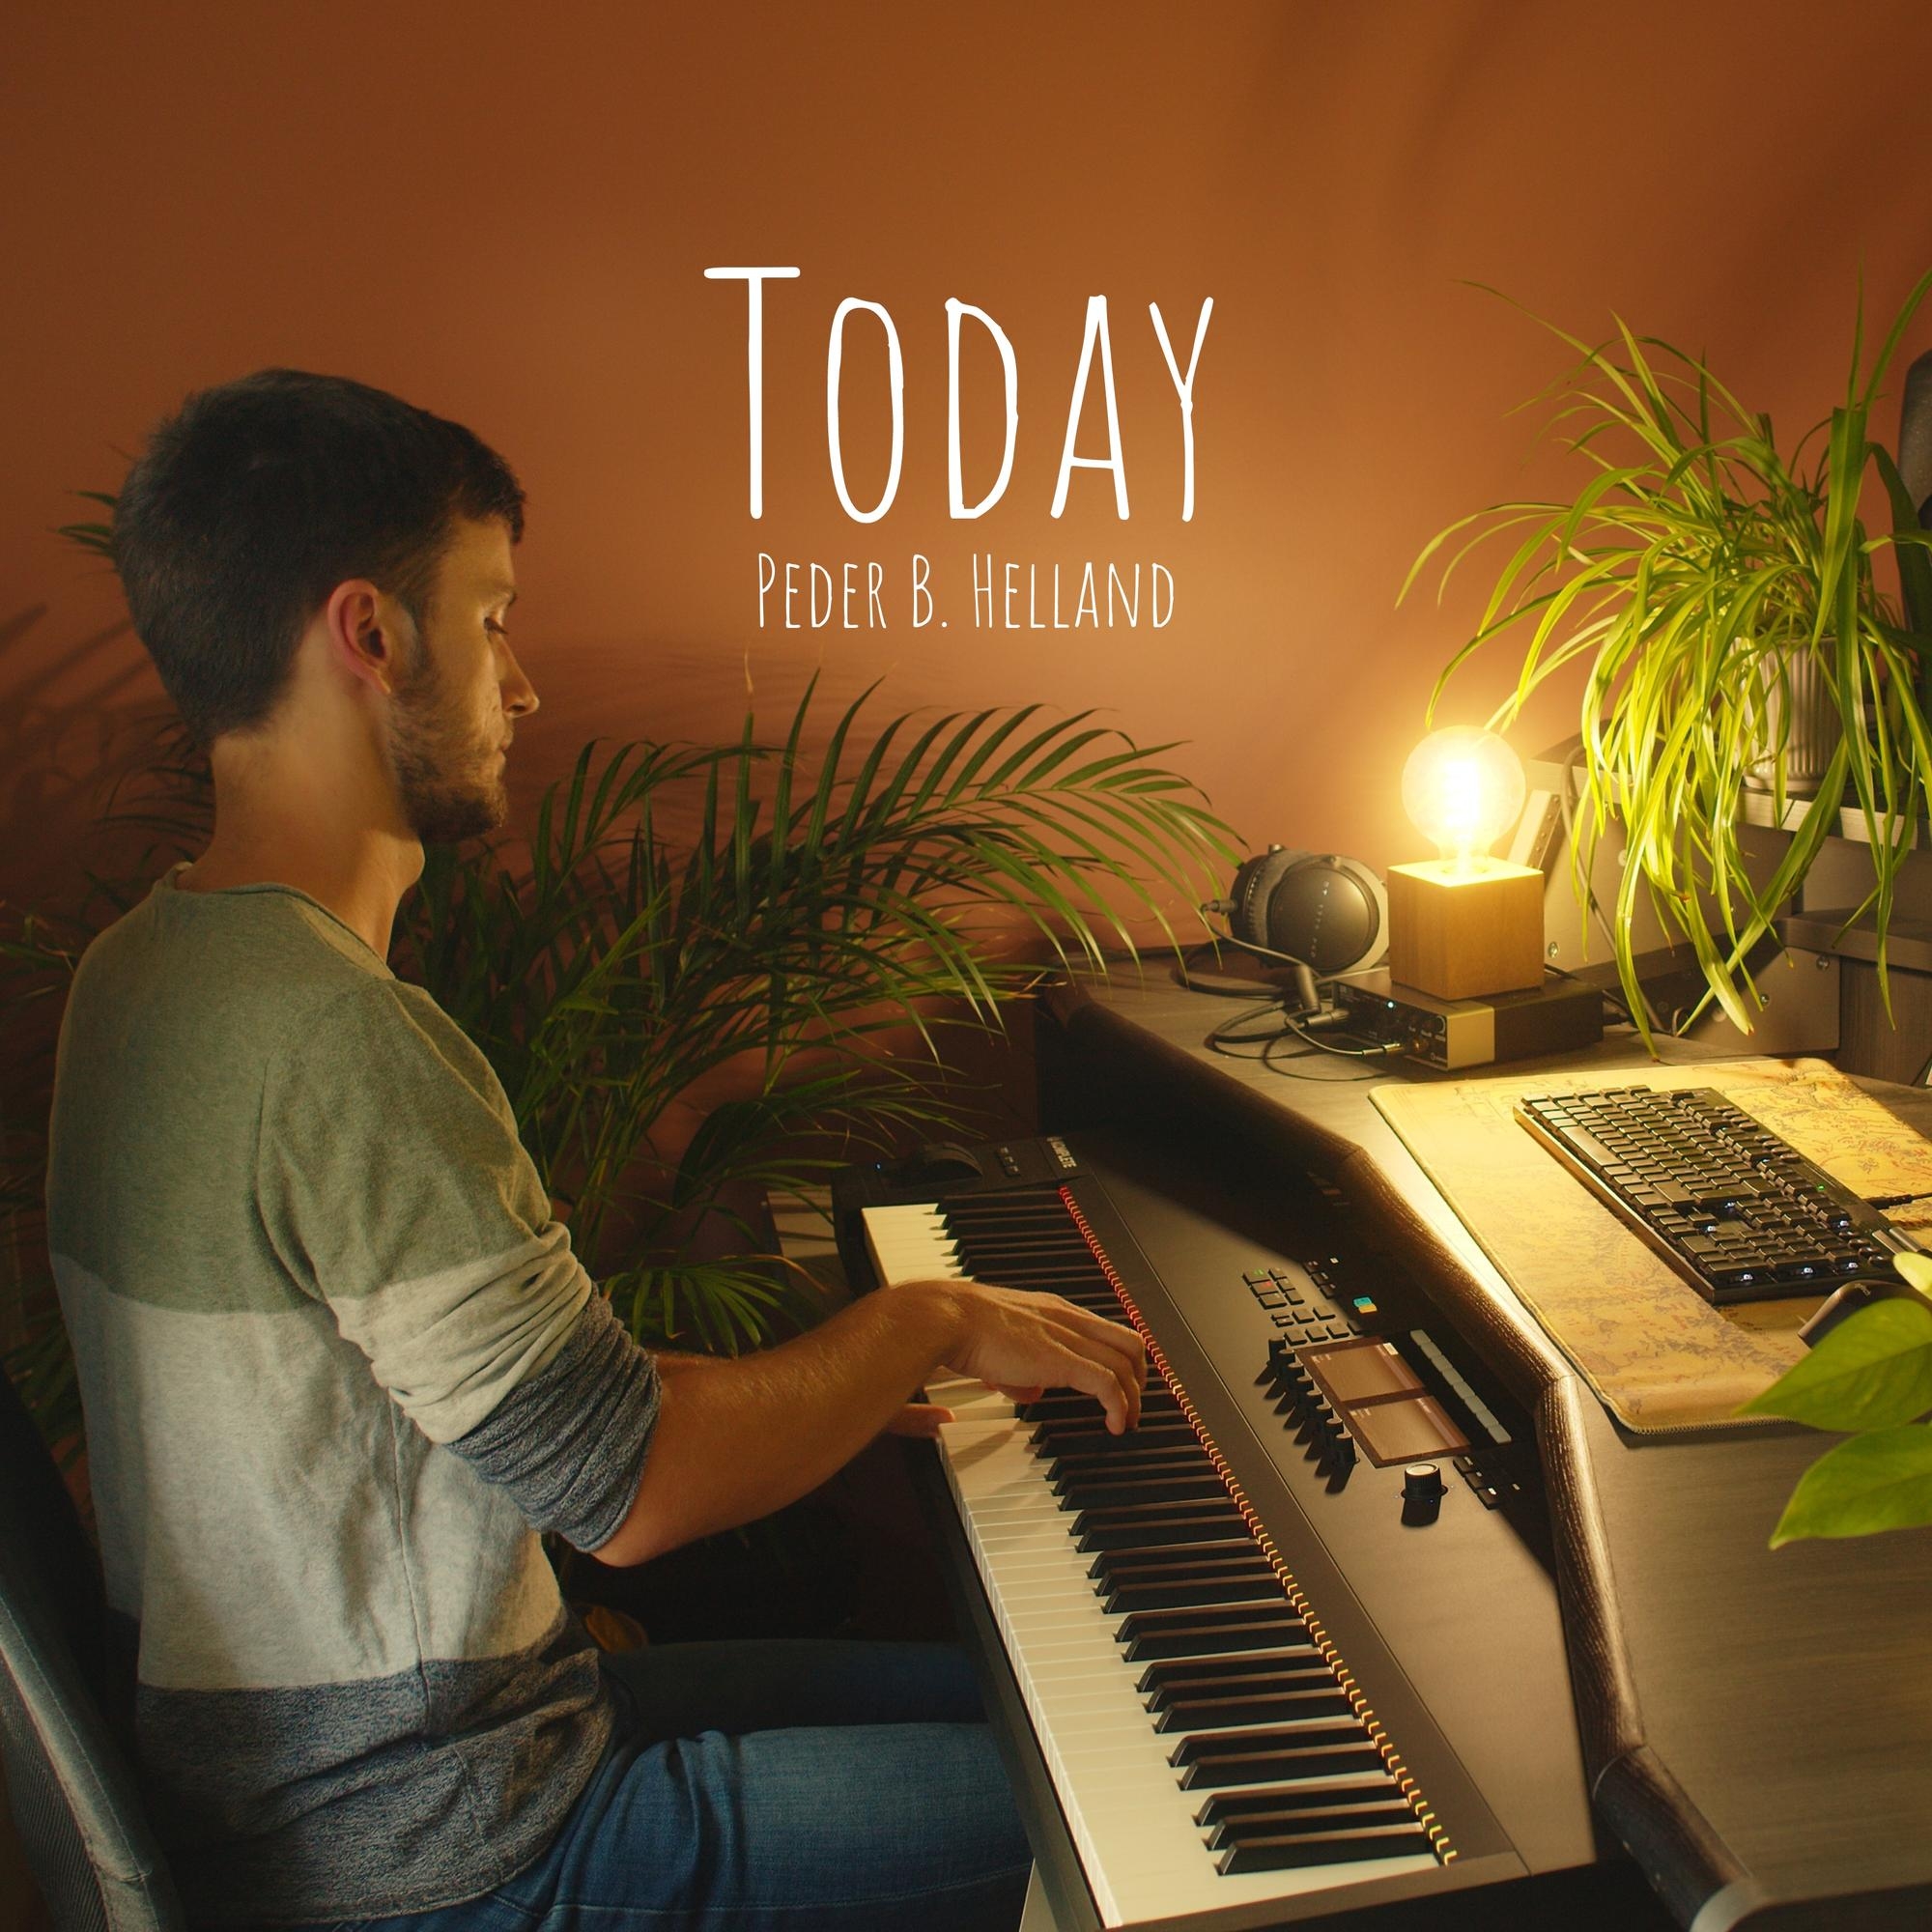 Cover art for the single Today by Peder B. Helland